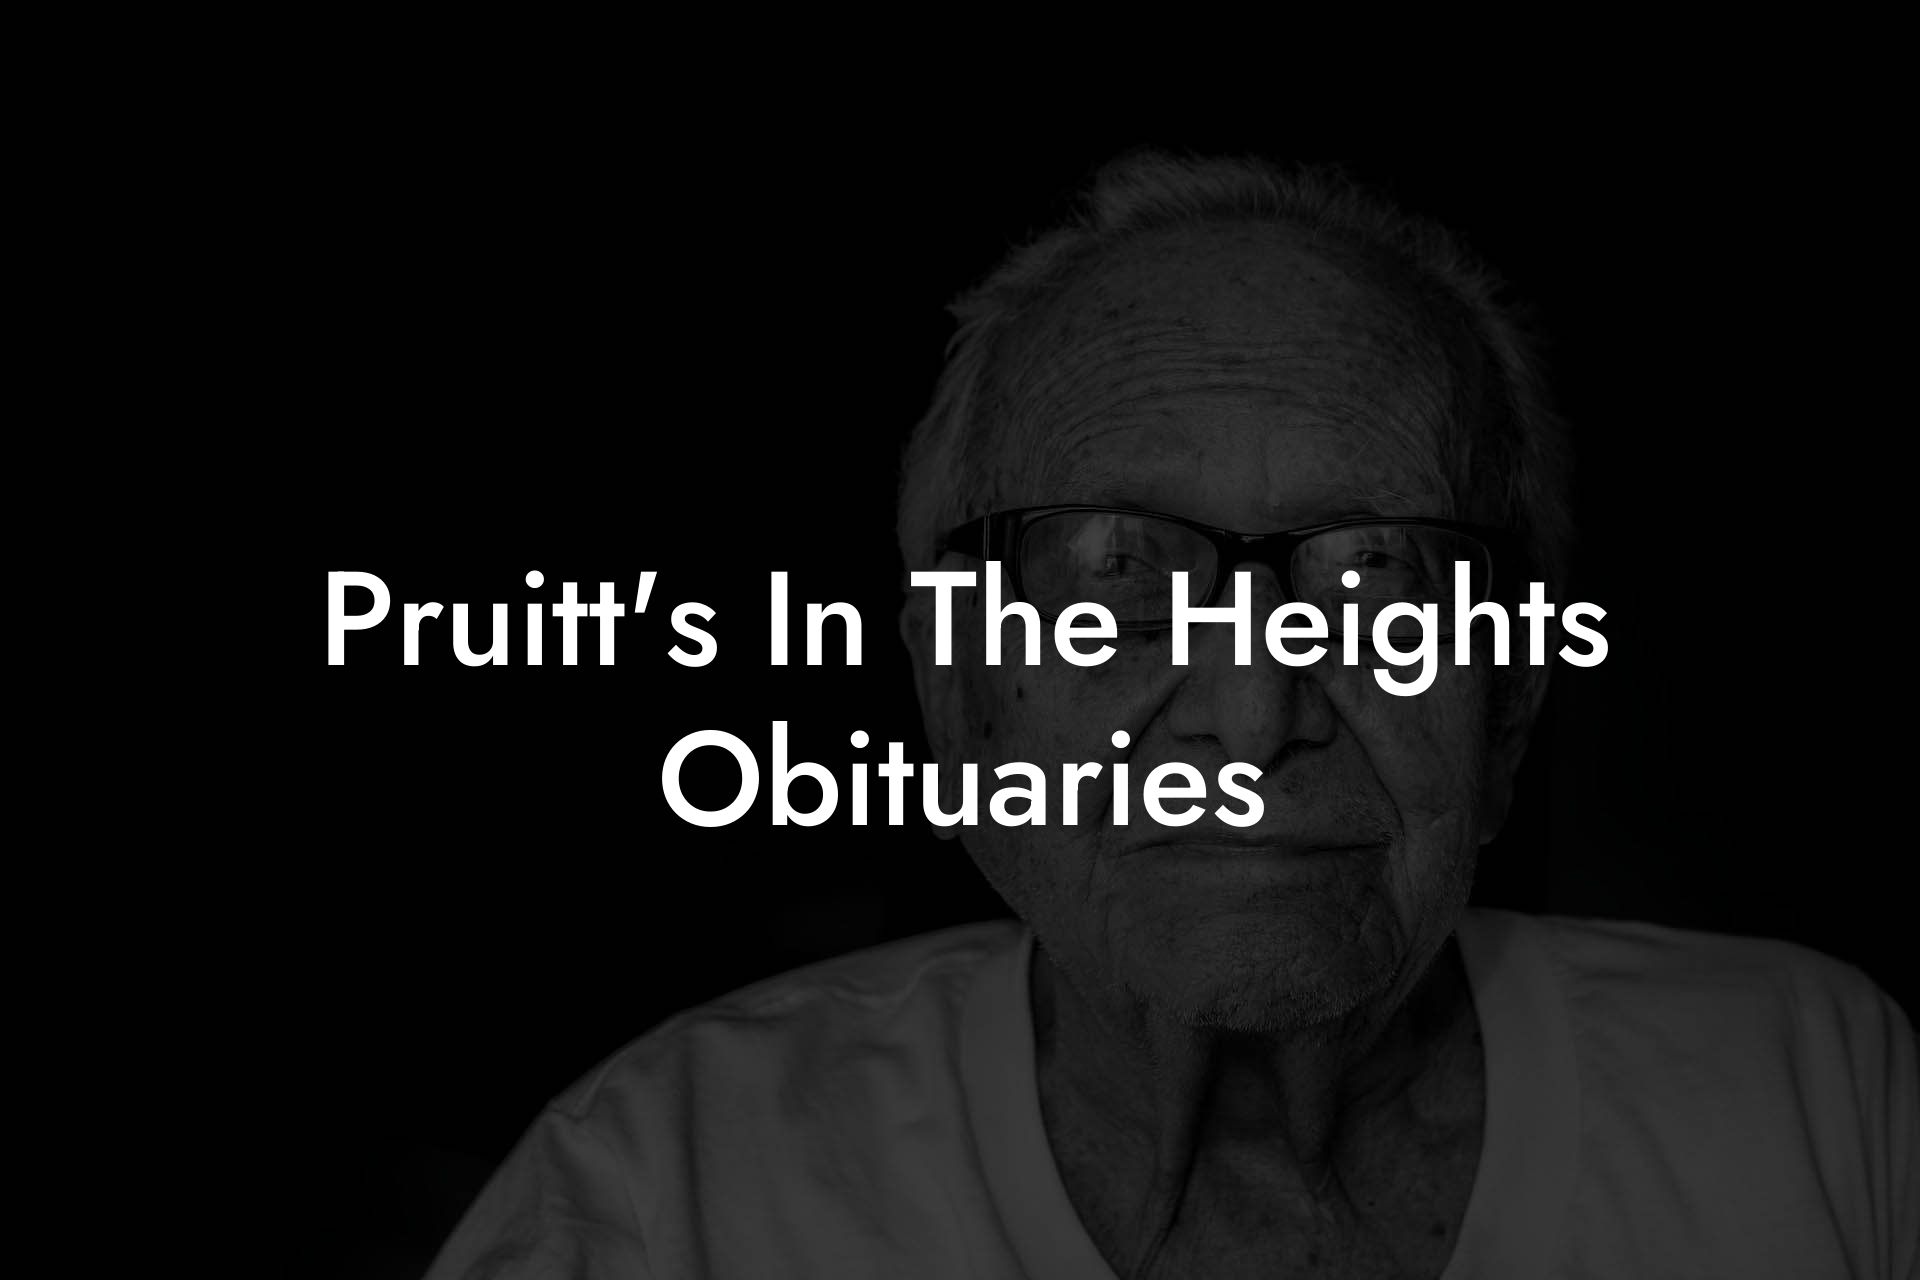 Pruitt's In The Heights Obituaries